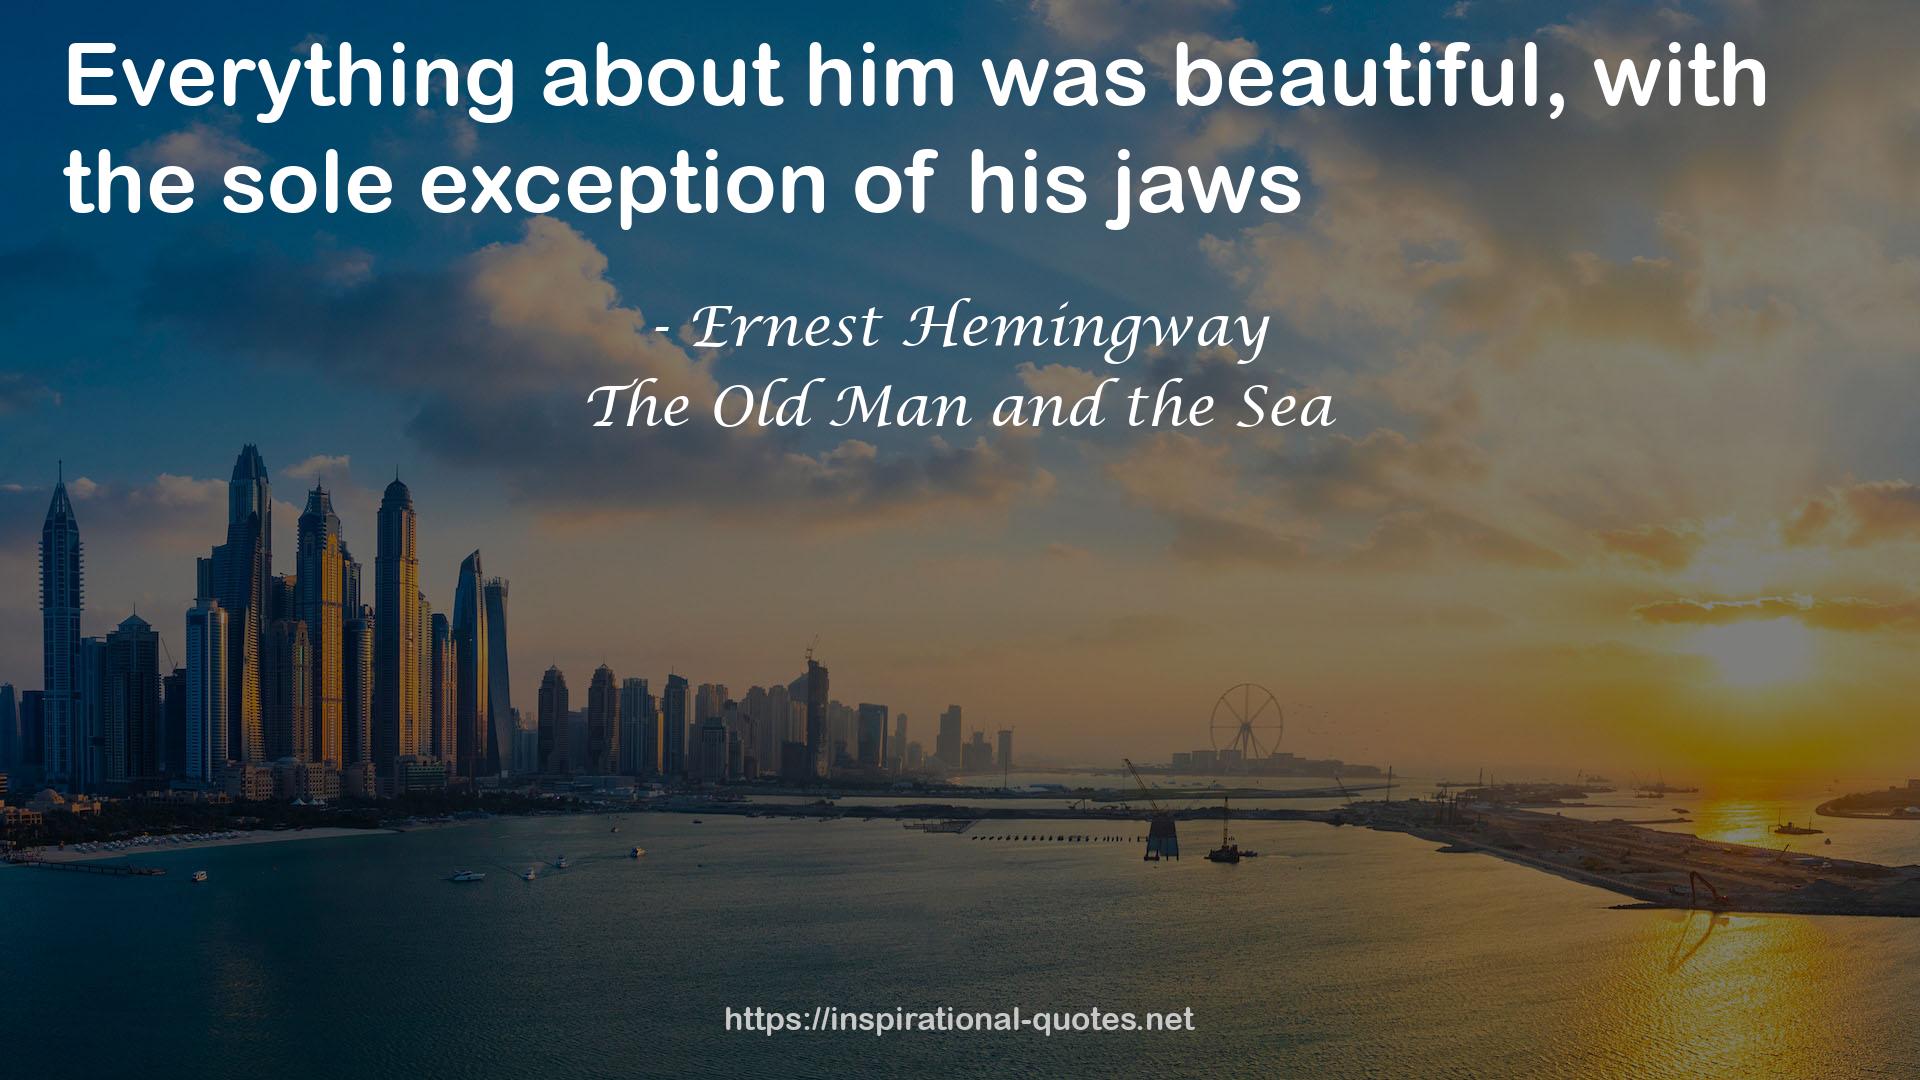 The Old Man and the Sea QUOTES